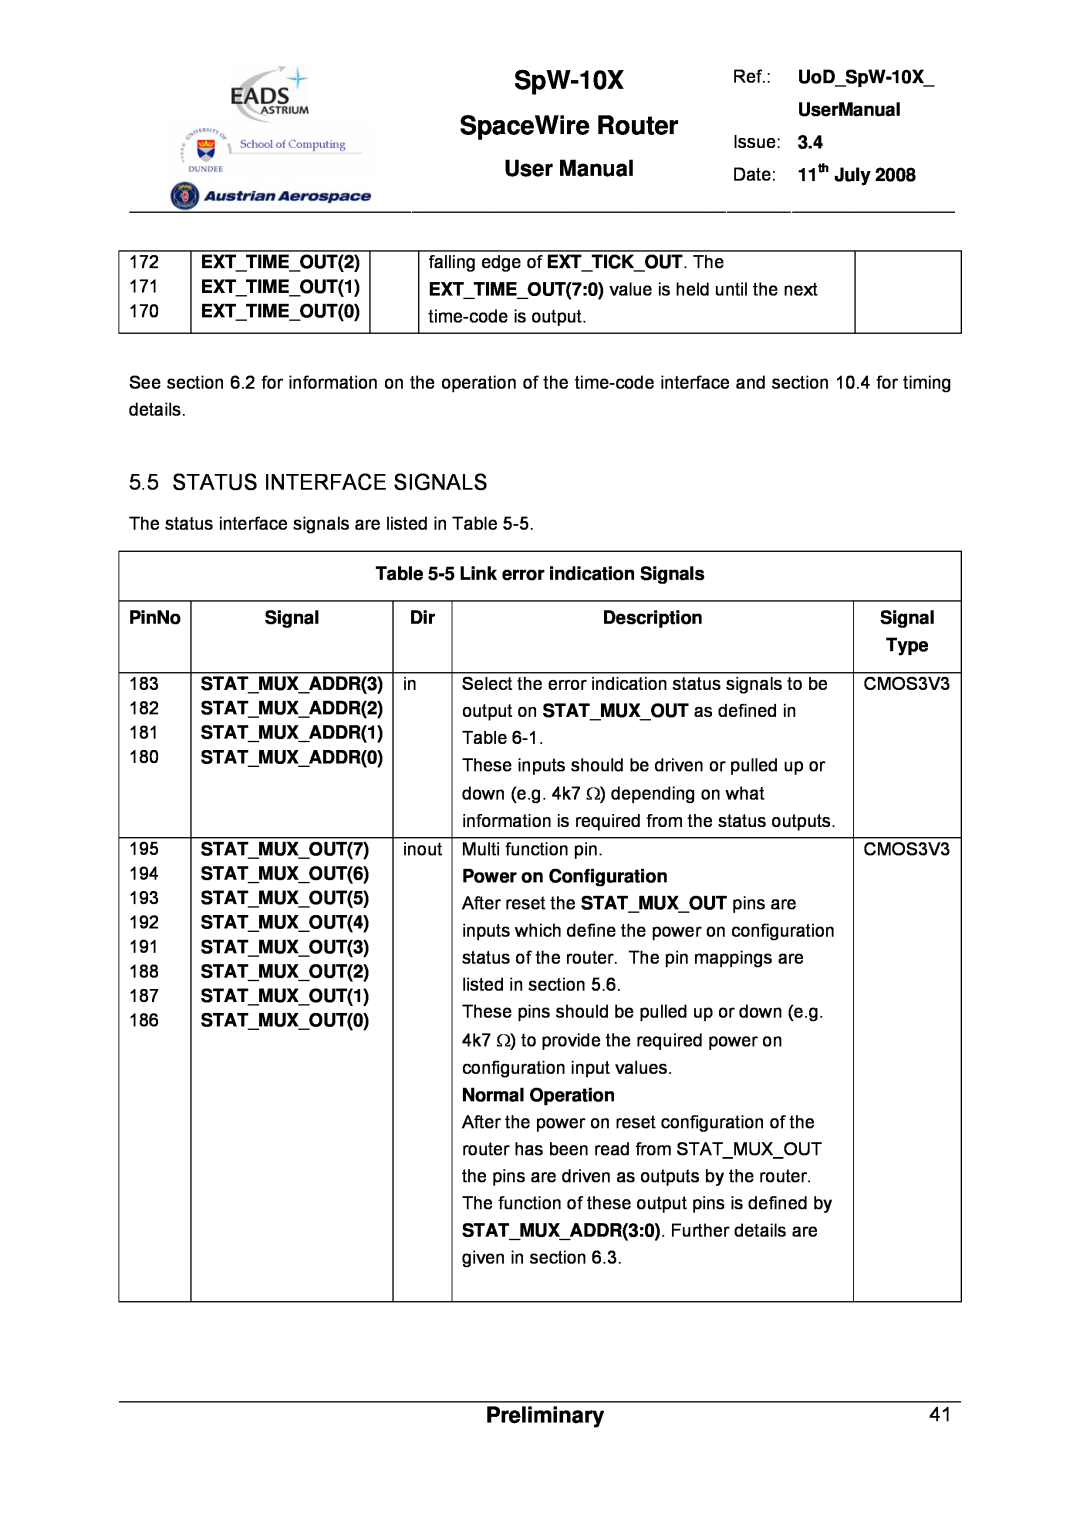 Atmel SpW-10X user manual Status Interface Signals, SpaceWire Router, User Manual, Preliminary 